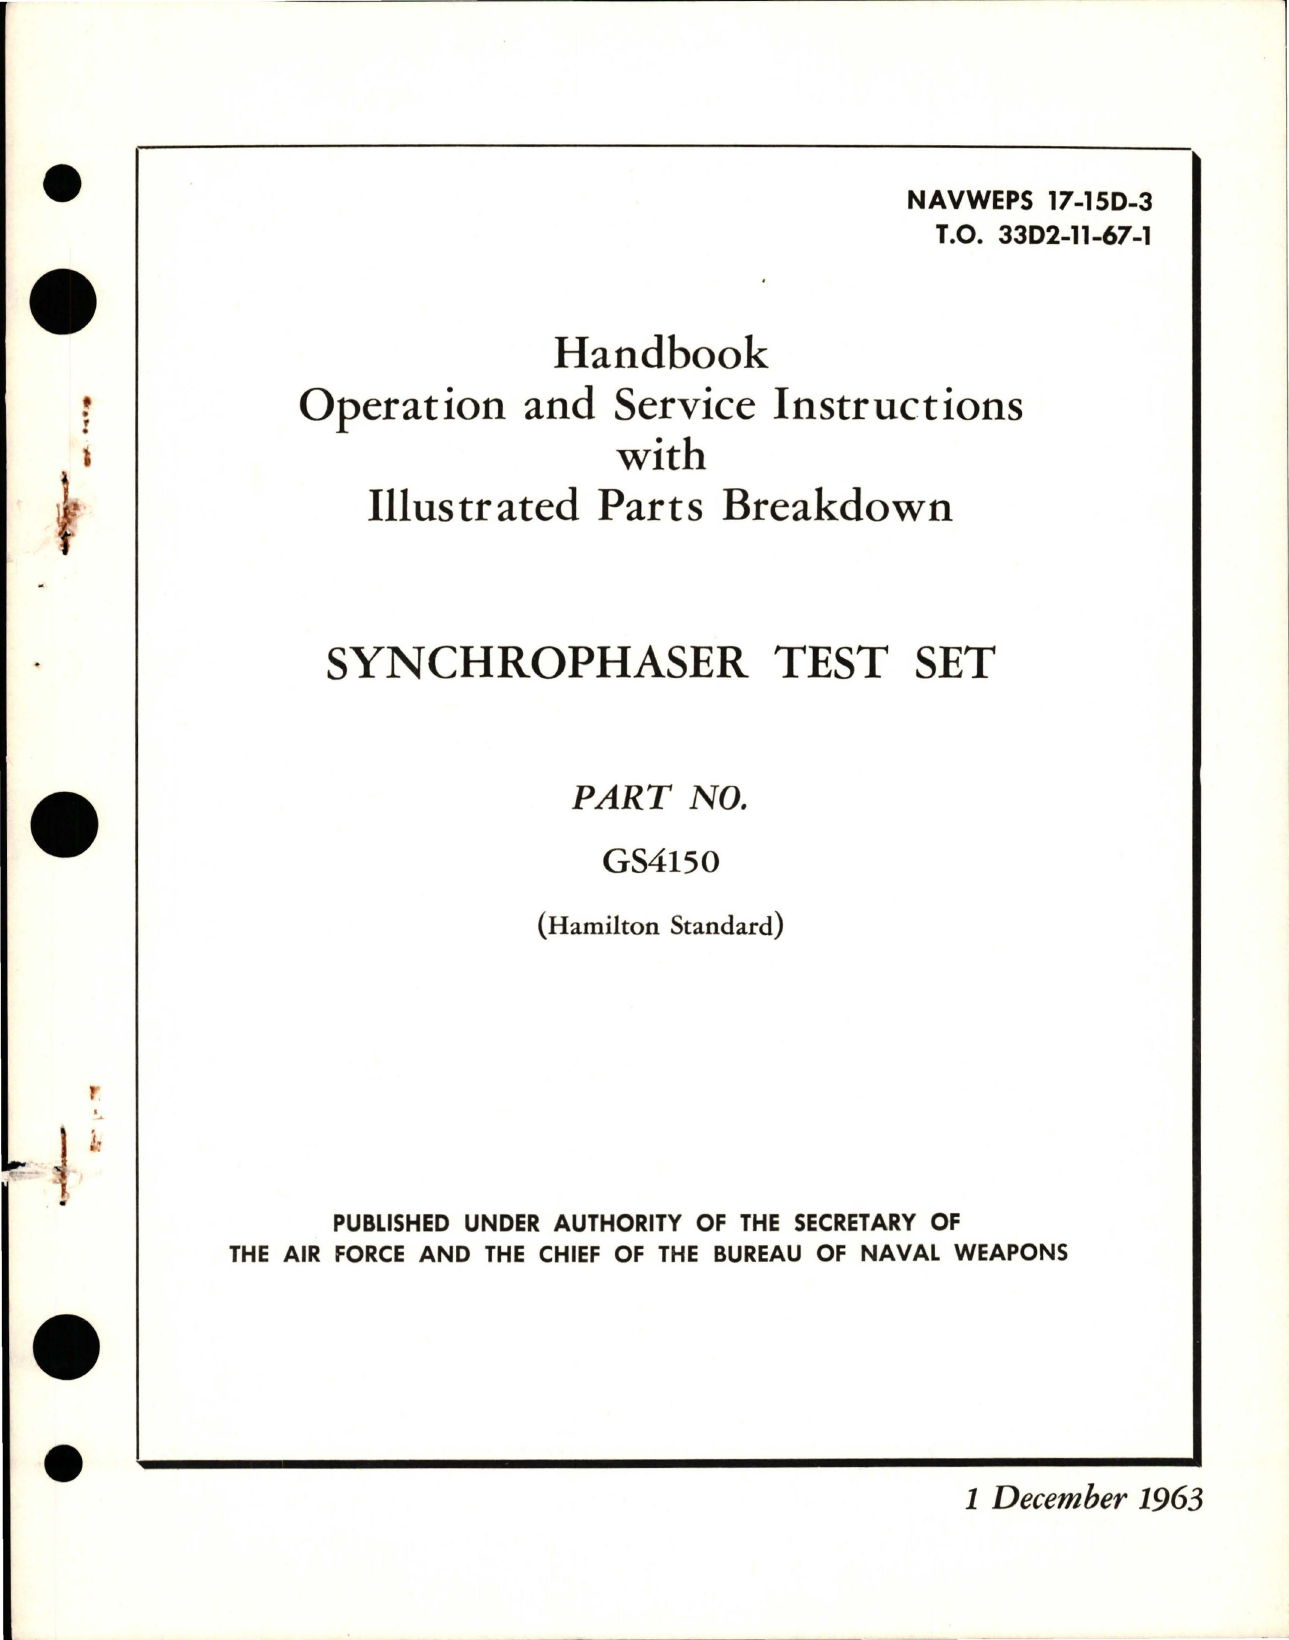 Sample page 1 from AirCorps Library document: Operation, Service Instructions with Illustrated Parts Breakdown for Synchrophaser Test Set - Part GS4150 